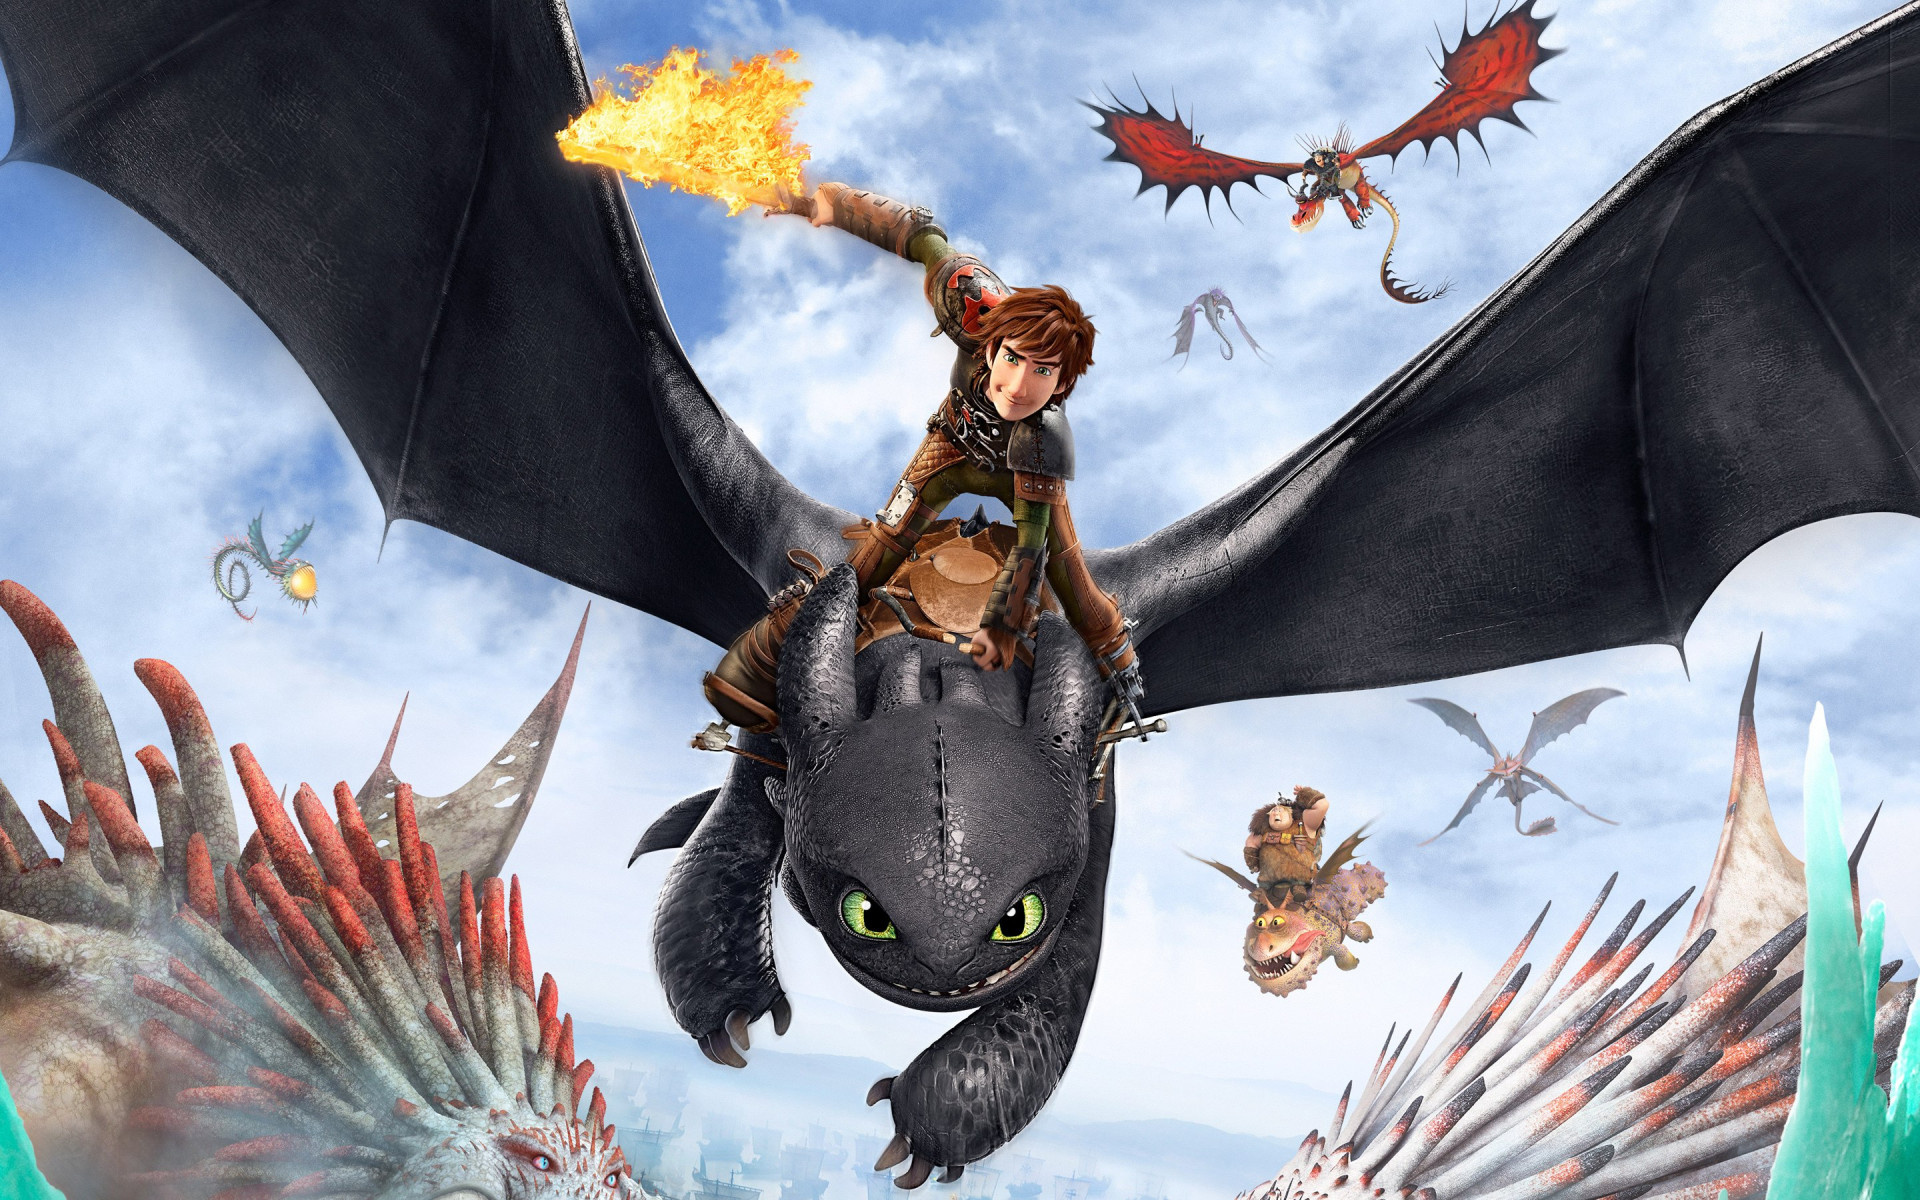 DreamWorks: Hiccup, Night Fury dragon, Computer-animated action fantasy film. 1920x1200 HD Wallpaper.